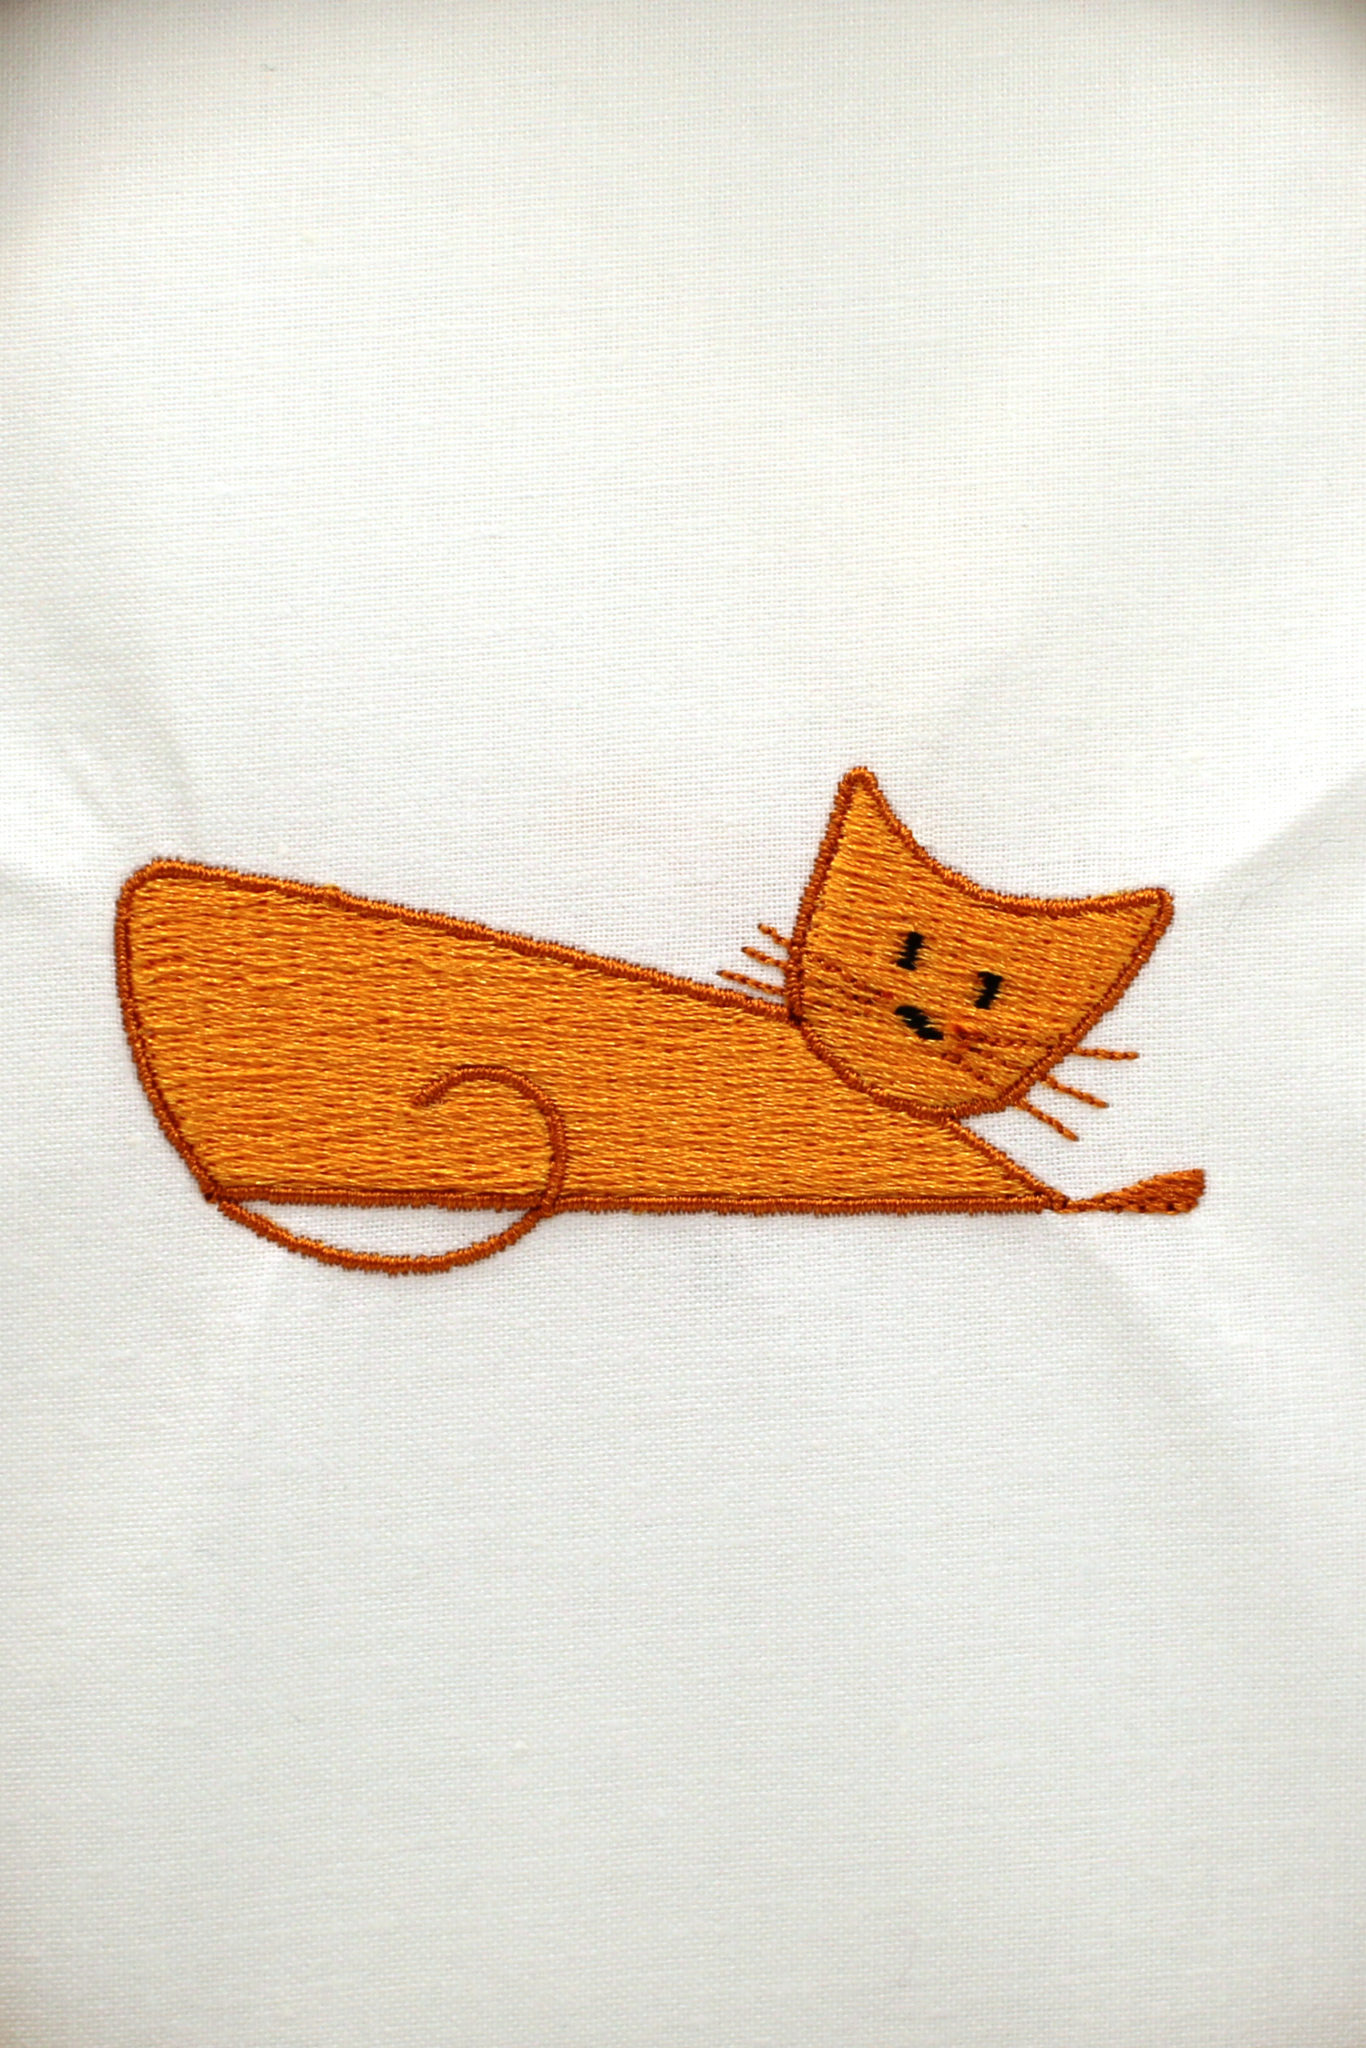 Doodle Cat 1 - Stitching Club Machine Quilting and Embroidery